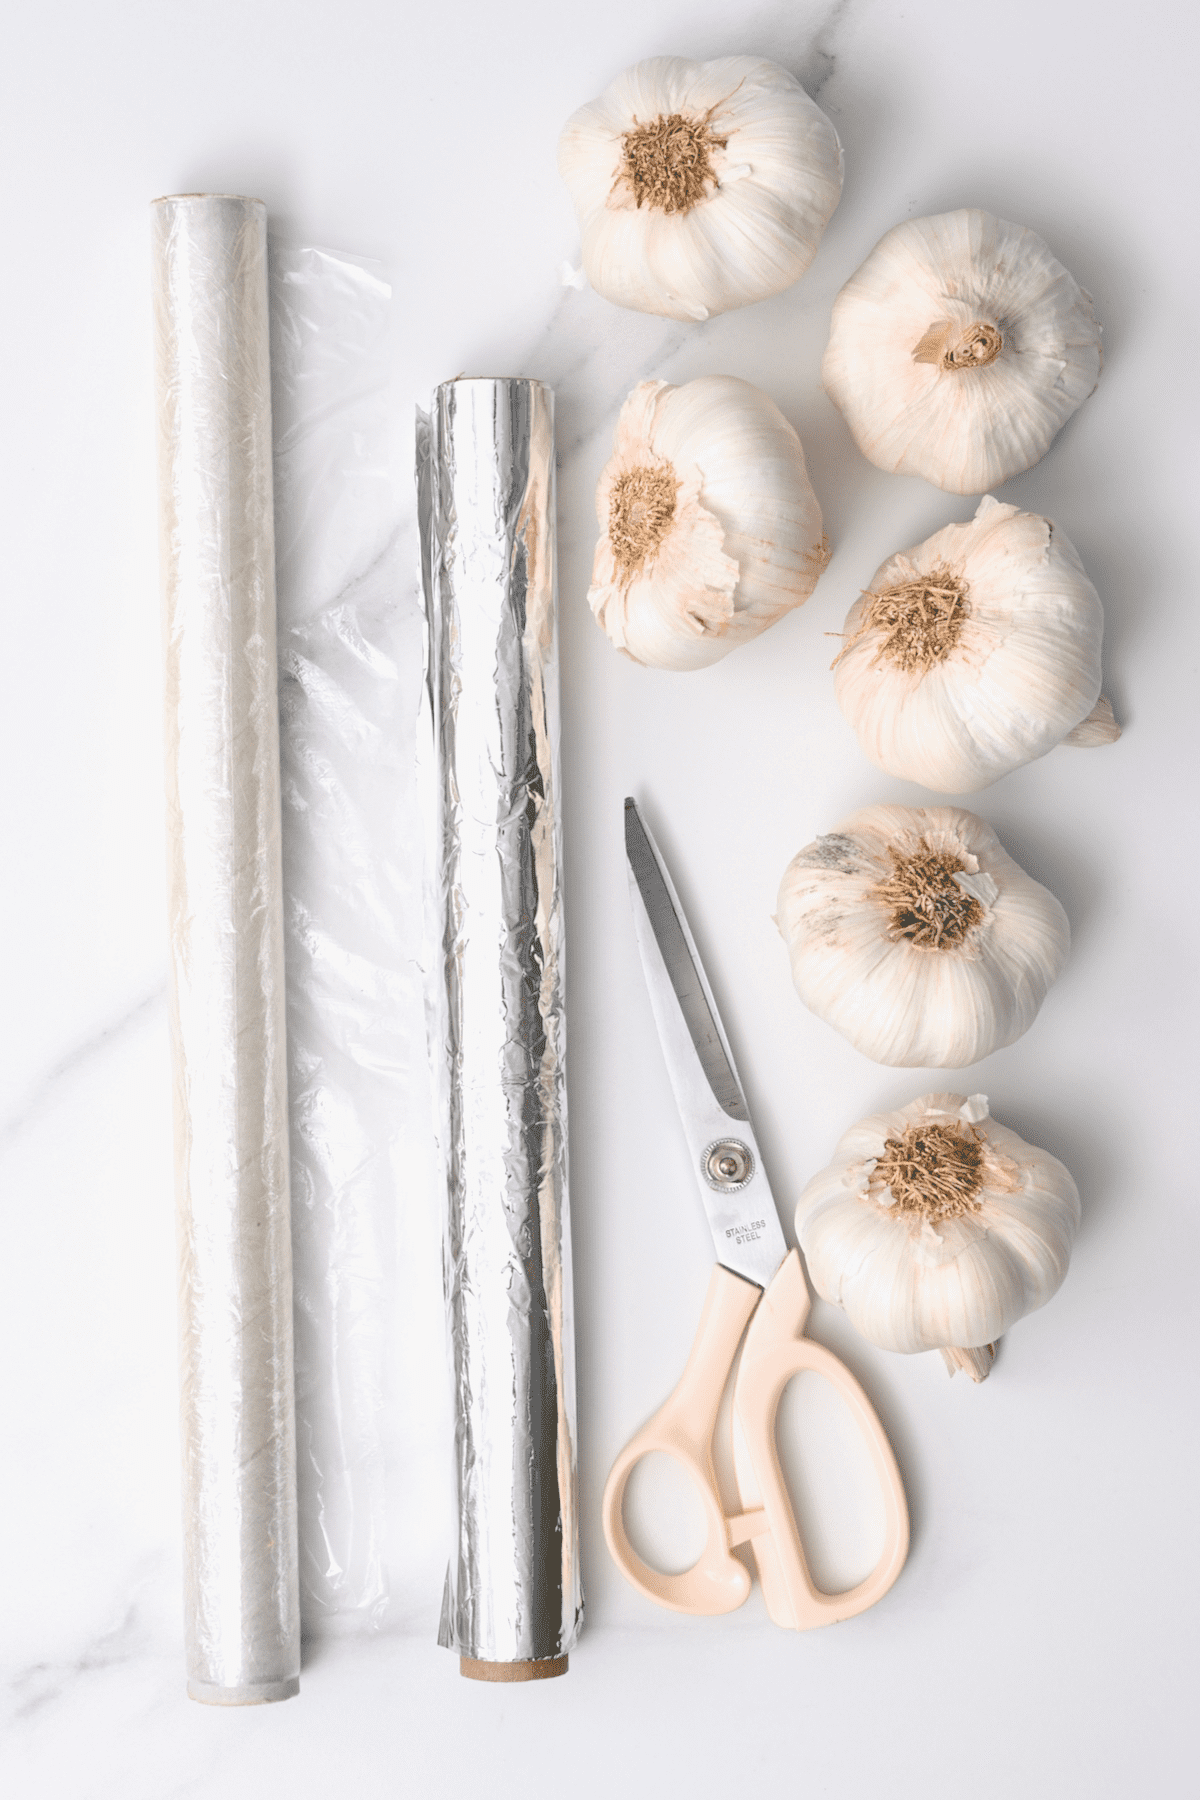 Six heads of garlic and tools to ferment them